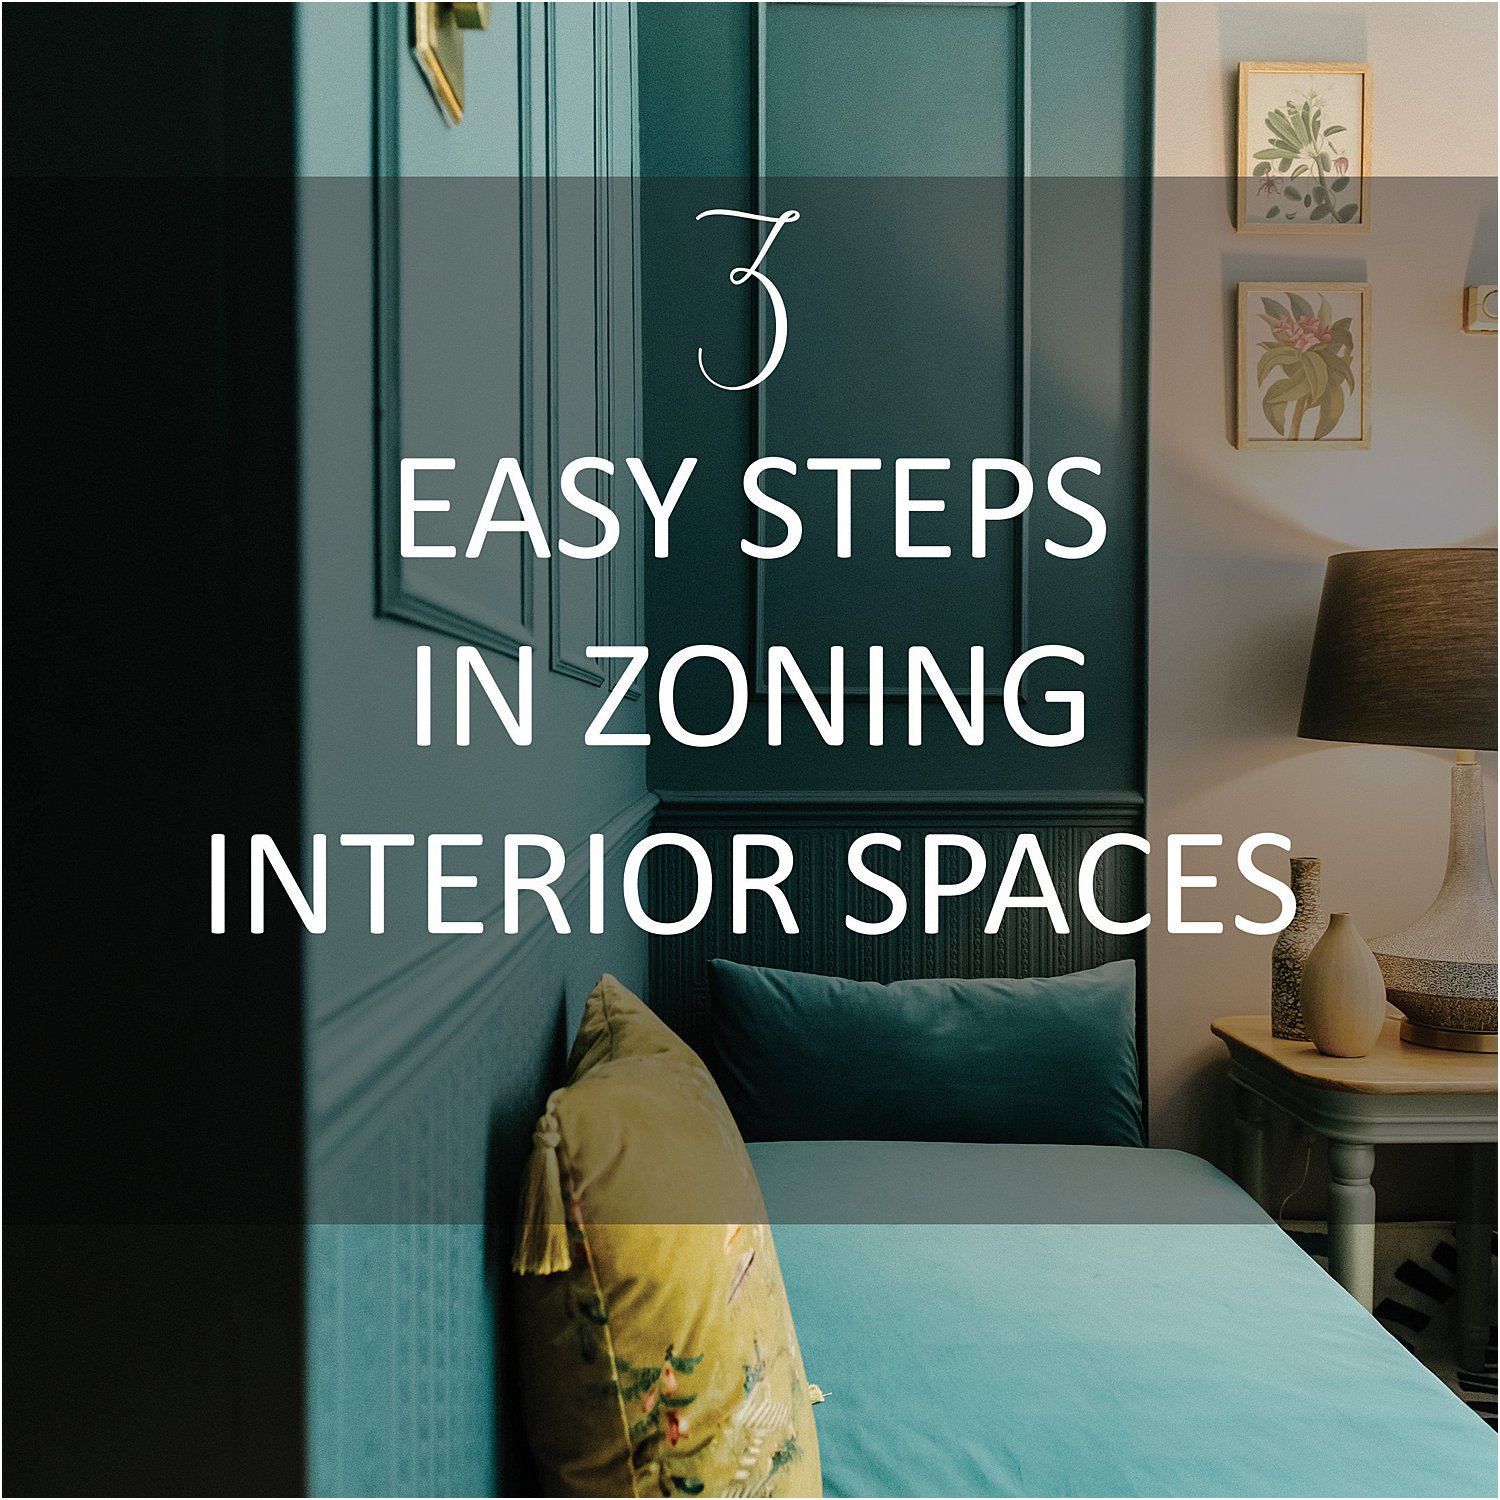 3-easy-steps-in-zoning-interior-spaces-crown-paint-lily-sawyer-photo-layered-home